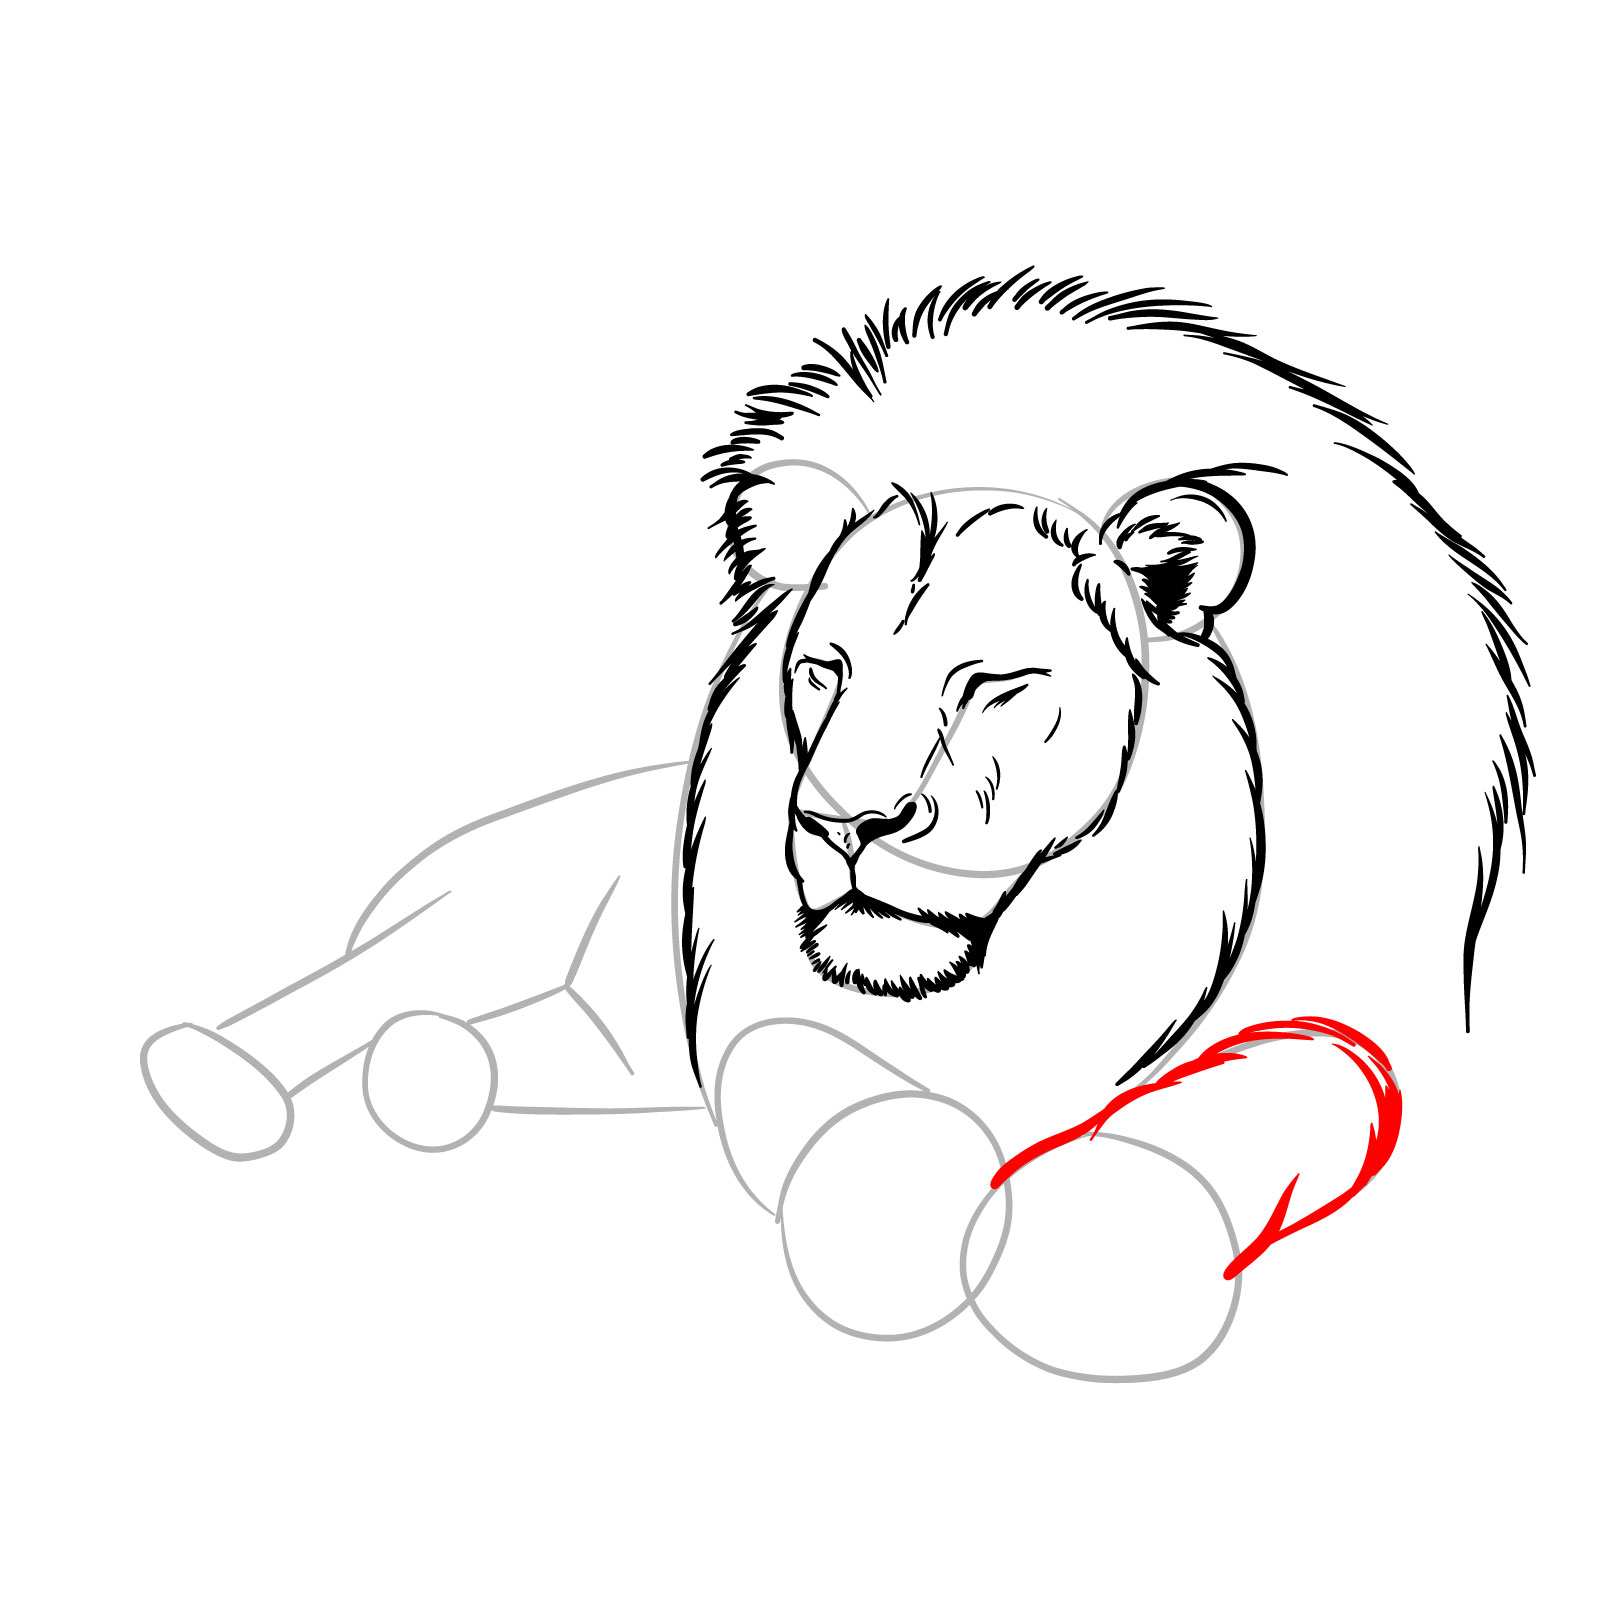 Sleeping lion drawing - Step 8: Outlining the first visible leg